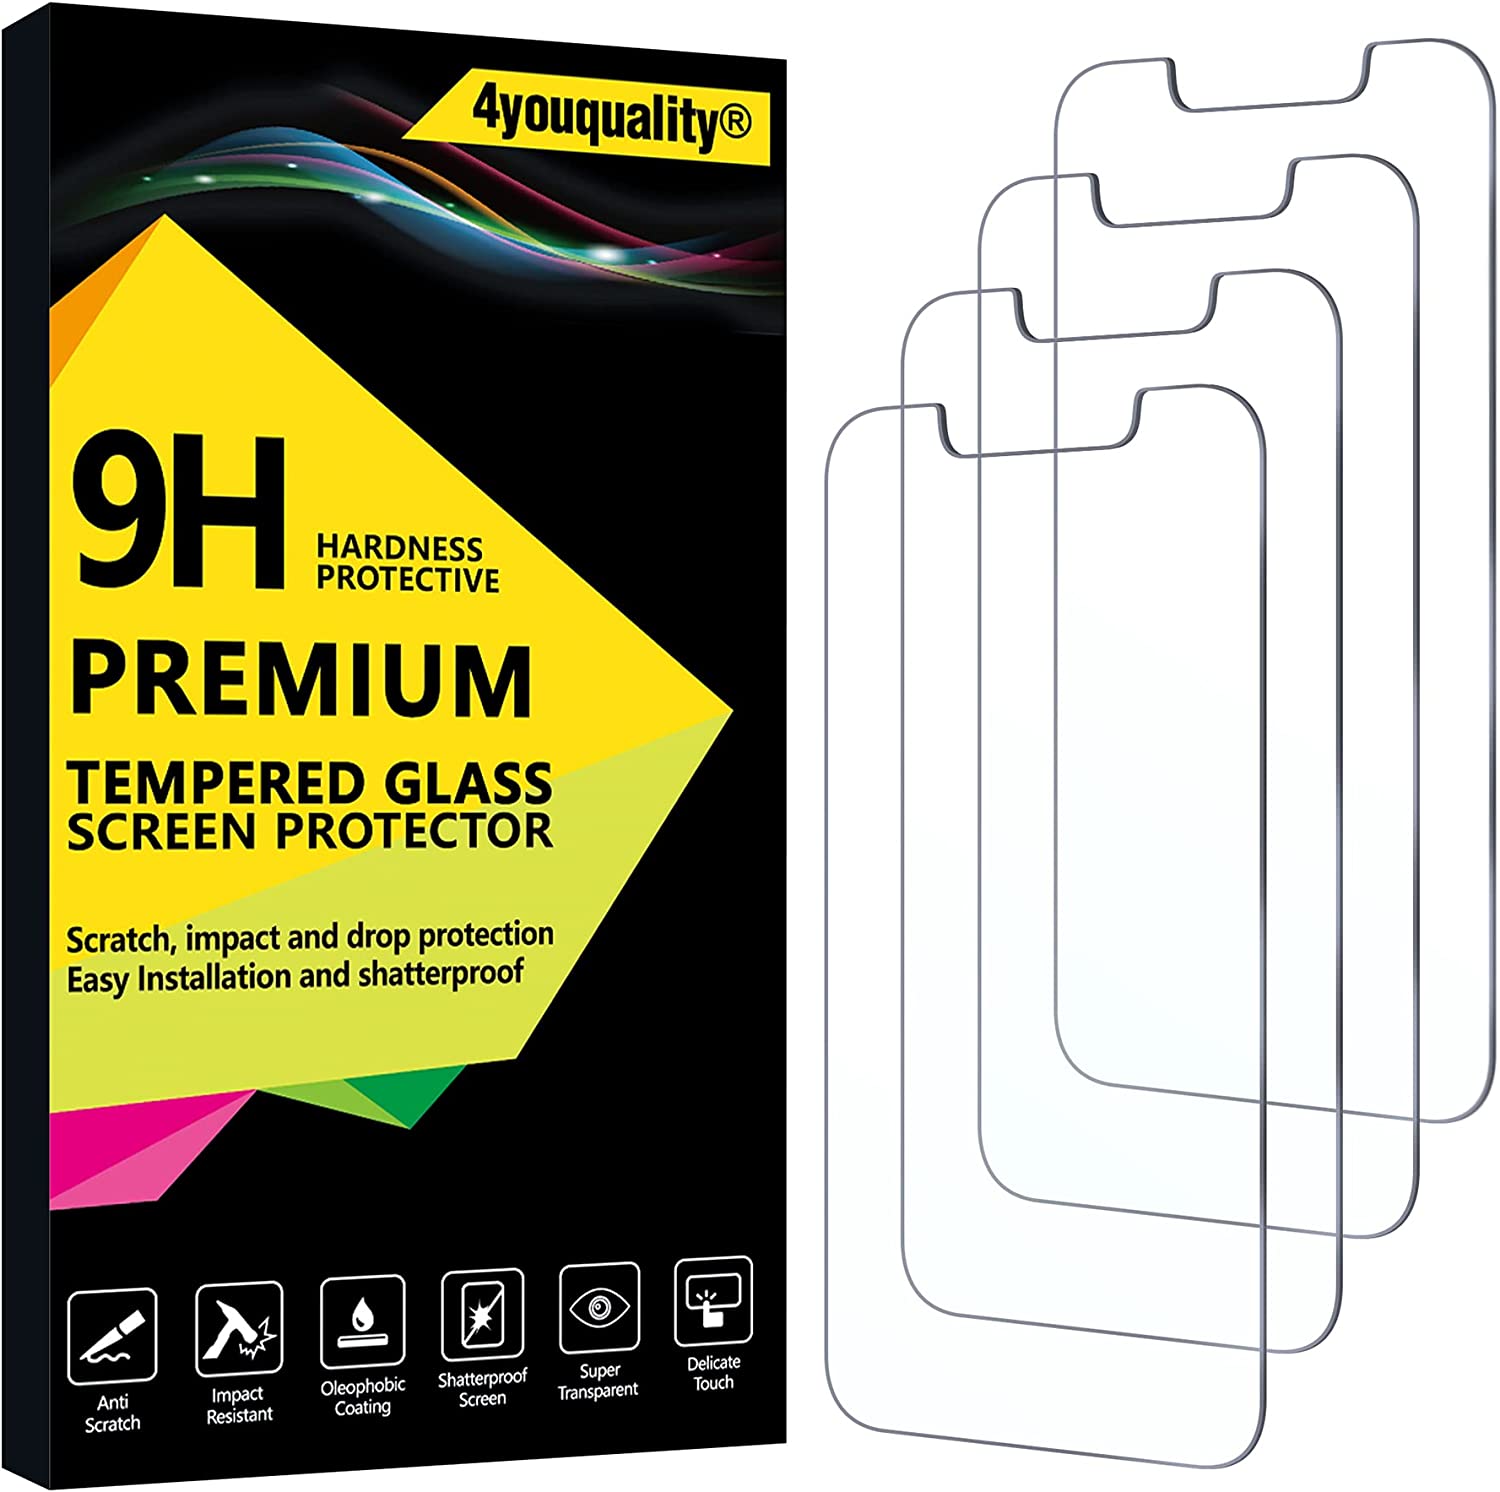 4YouQuality 9H Premium Tempered Glass Screen Protector 4 Pack for Iphone 13 & Pro RRP 4.99 CLEARANCE XL 3.49